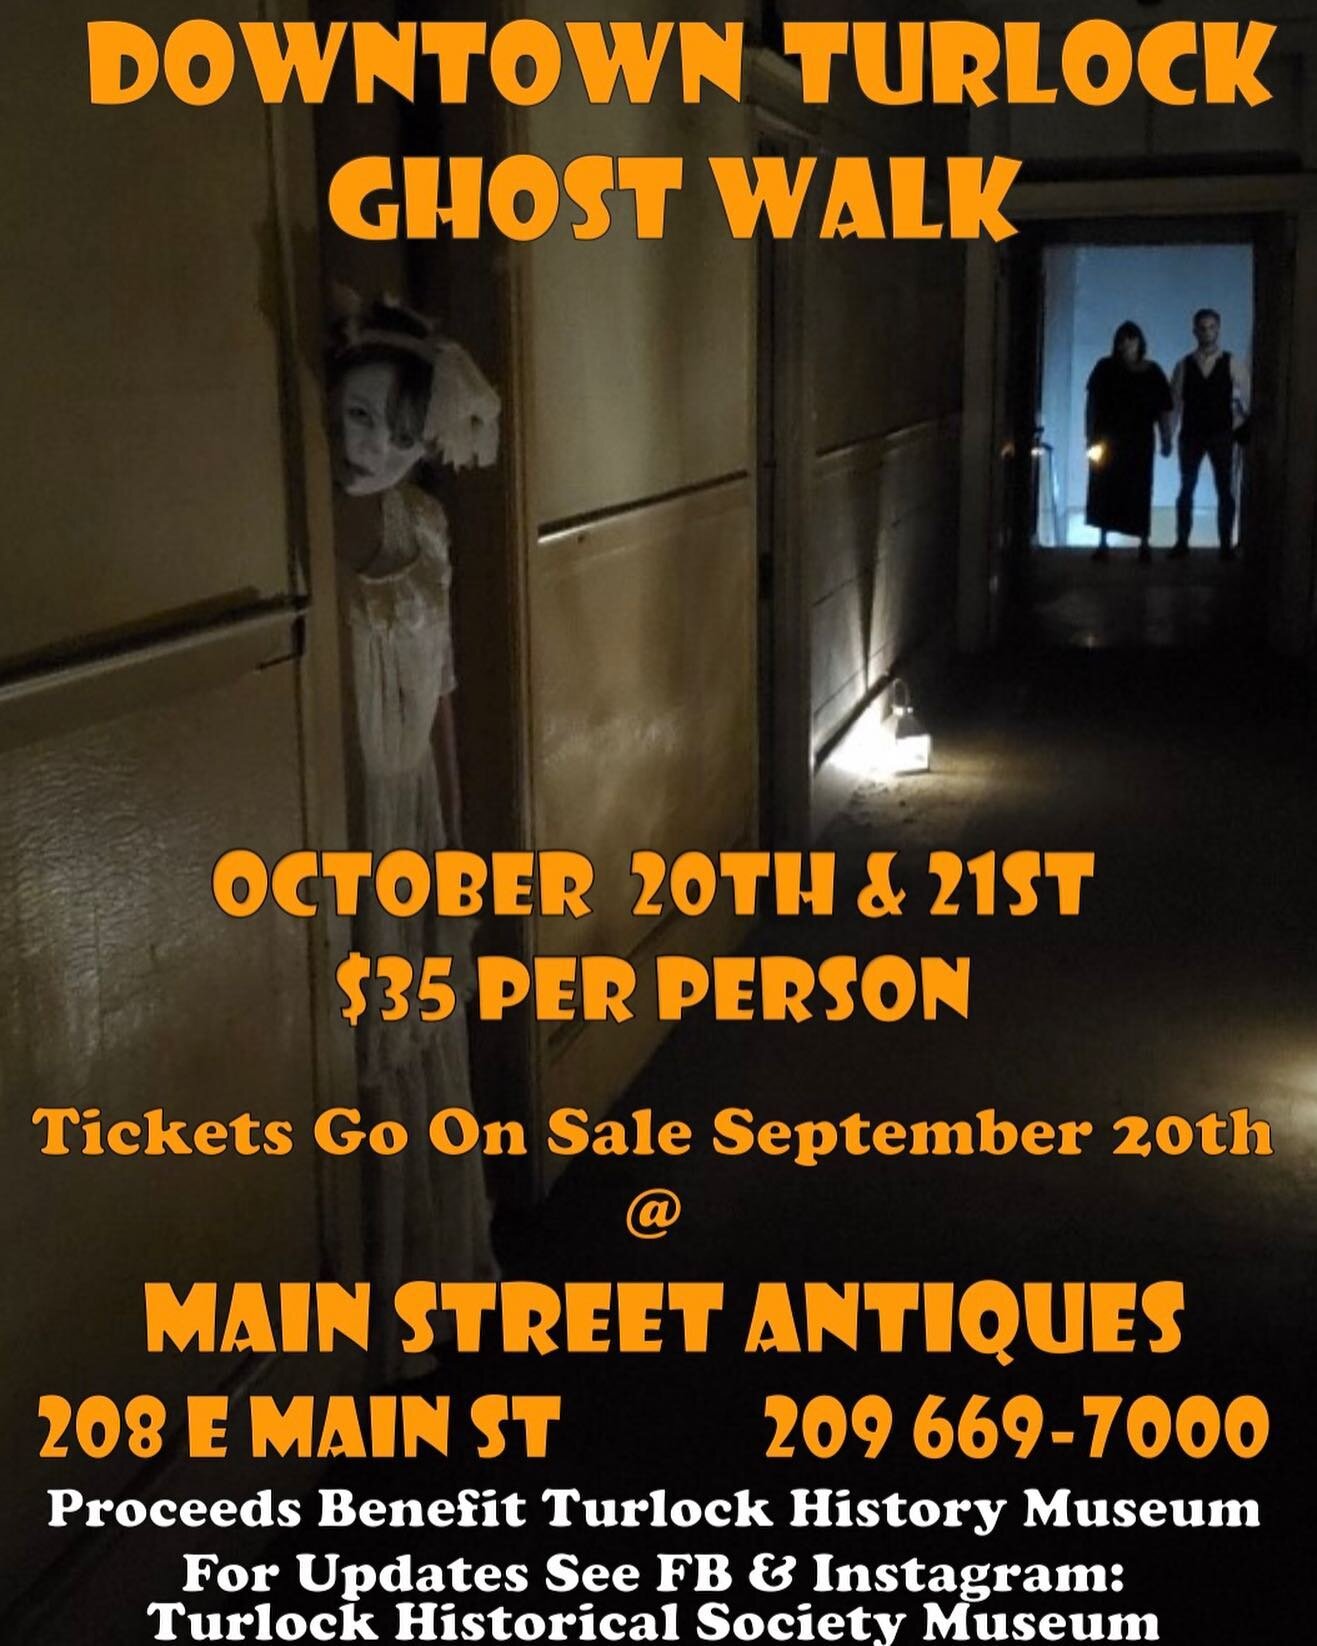 If you&rsquo;ve never been this is a must do!! 👻👻It&rsquo;s that time of year again! The tour is about 1 1/2 hour walking tour and there are stairs in 2 locations. The tour is ok for older (braver) children. Your very dead tour hosts will share the